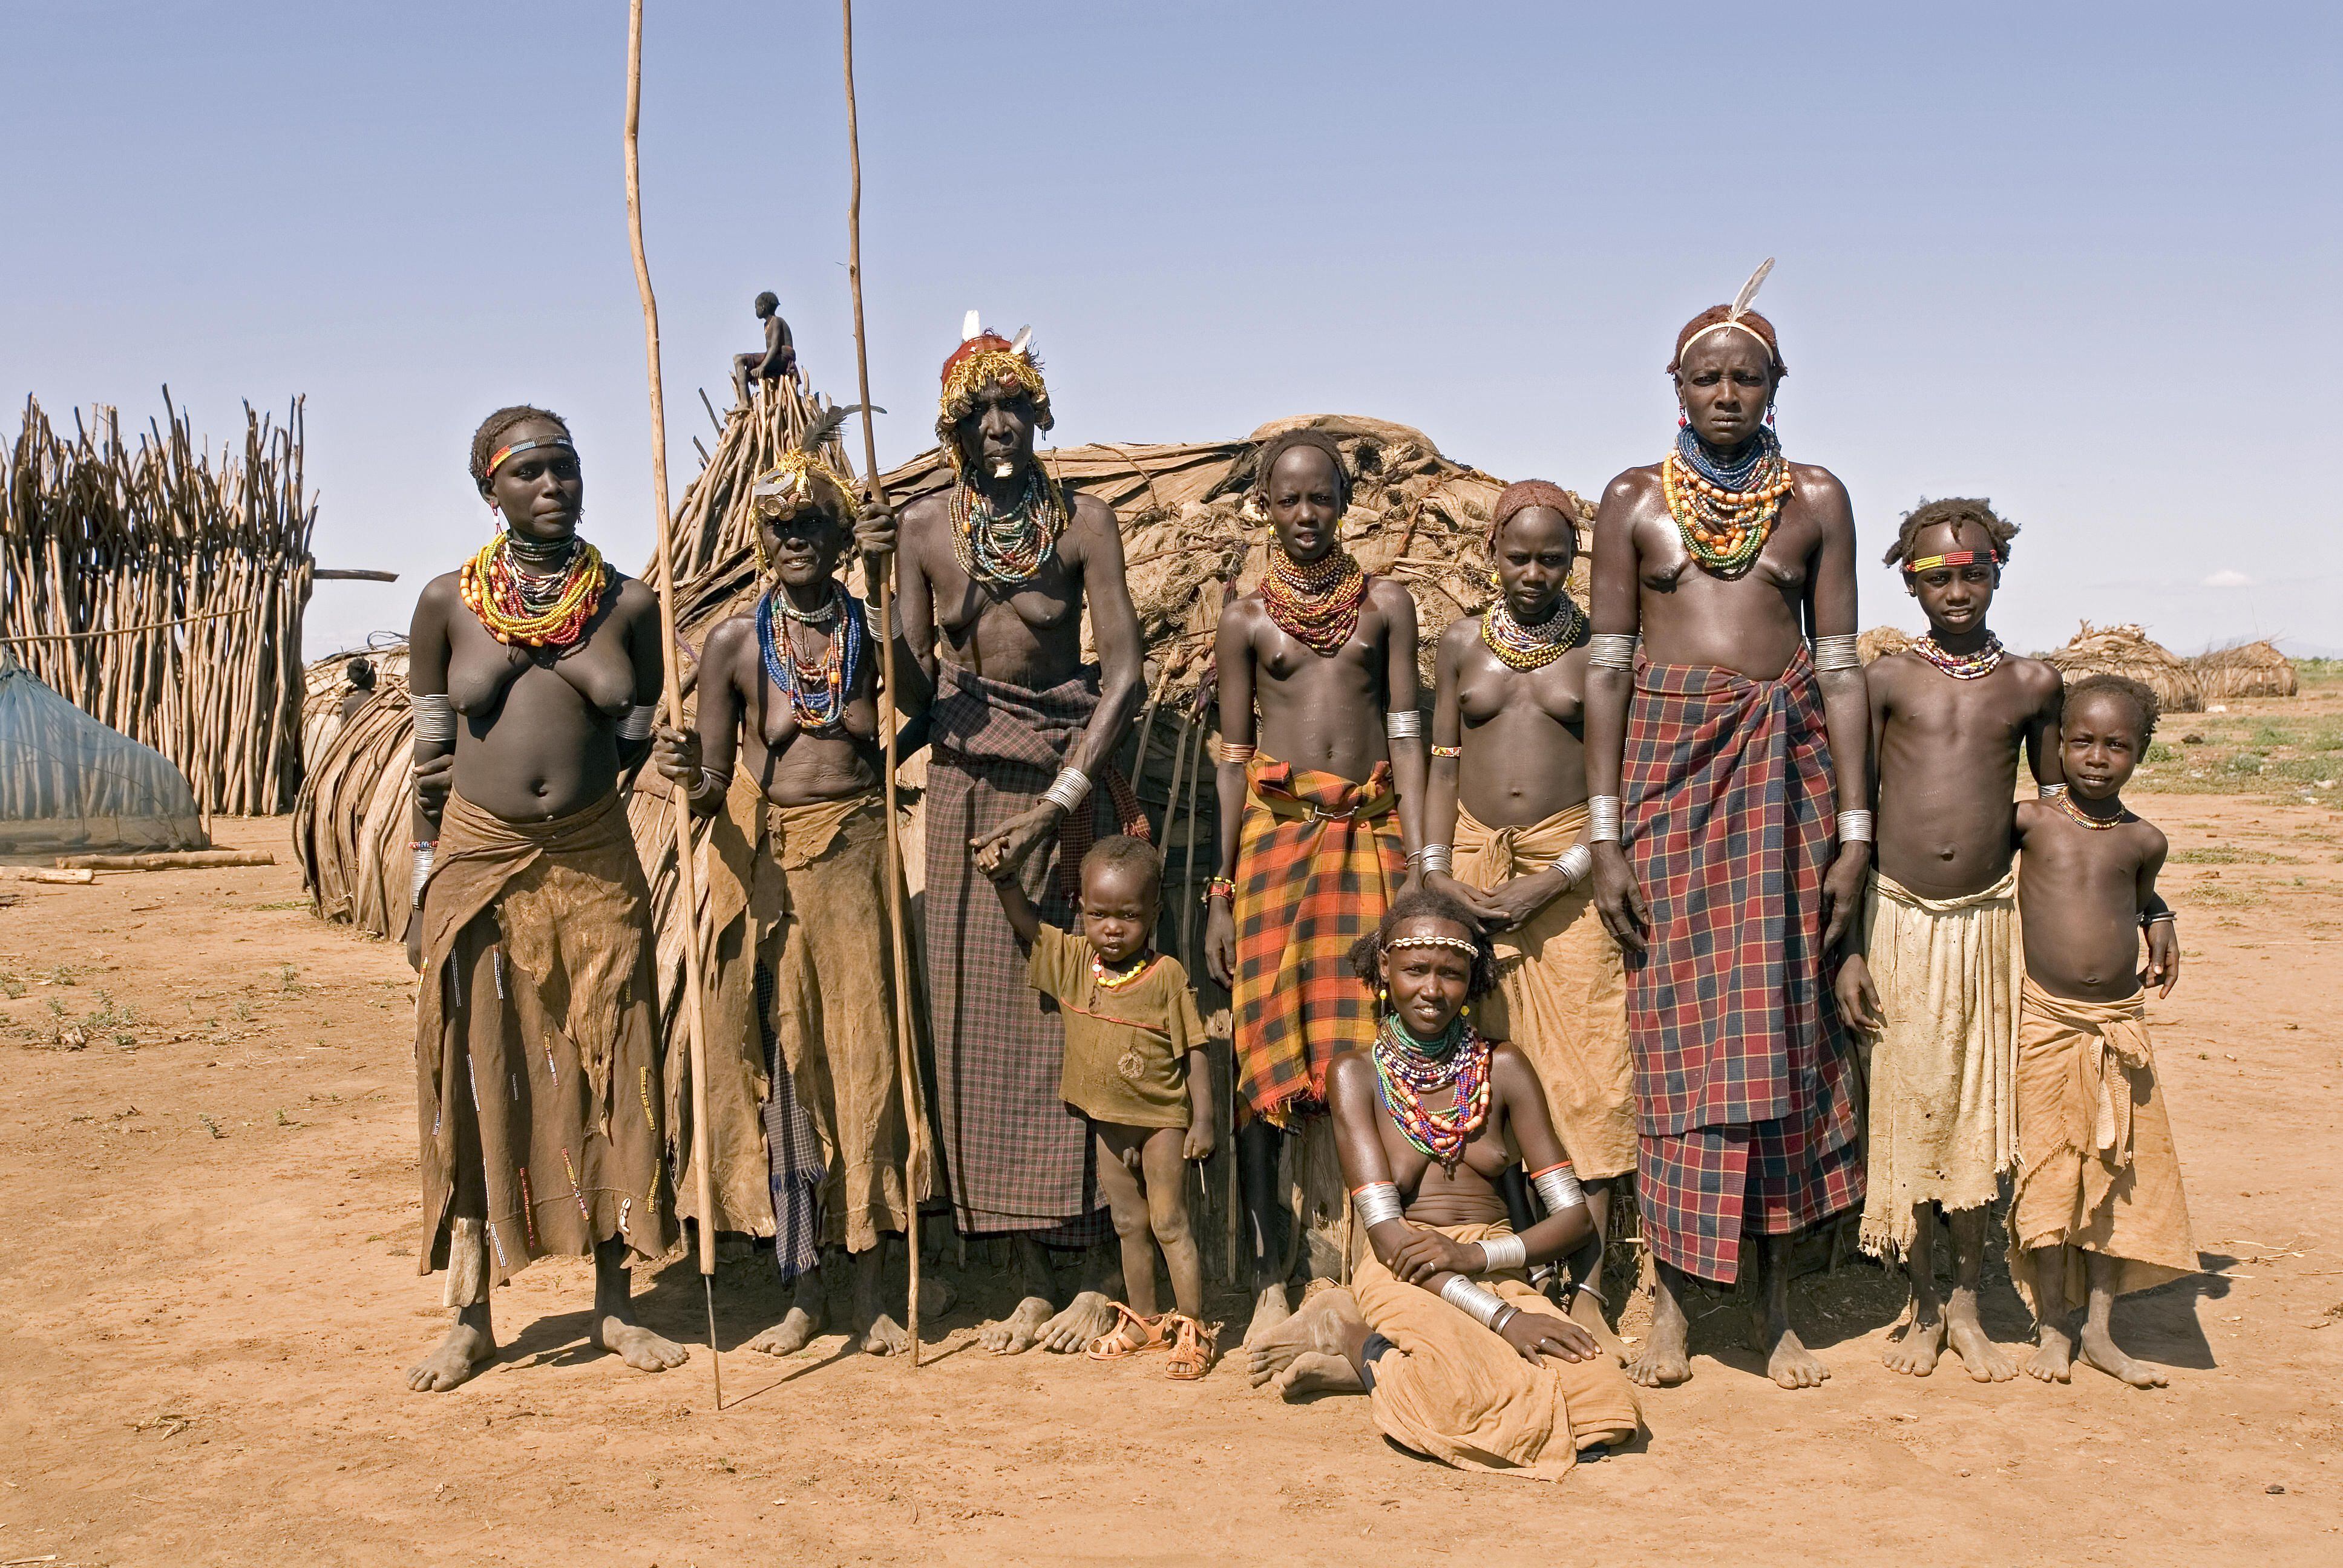 T645ED Mursi People, a Nilotic pastoralist ethnic group in Ethiopia, Africa. Image shot 03/2008. Exact date unknown.